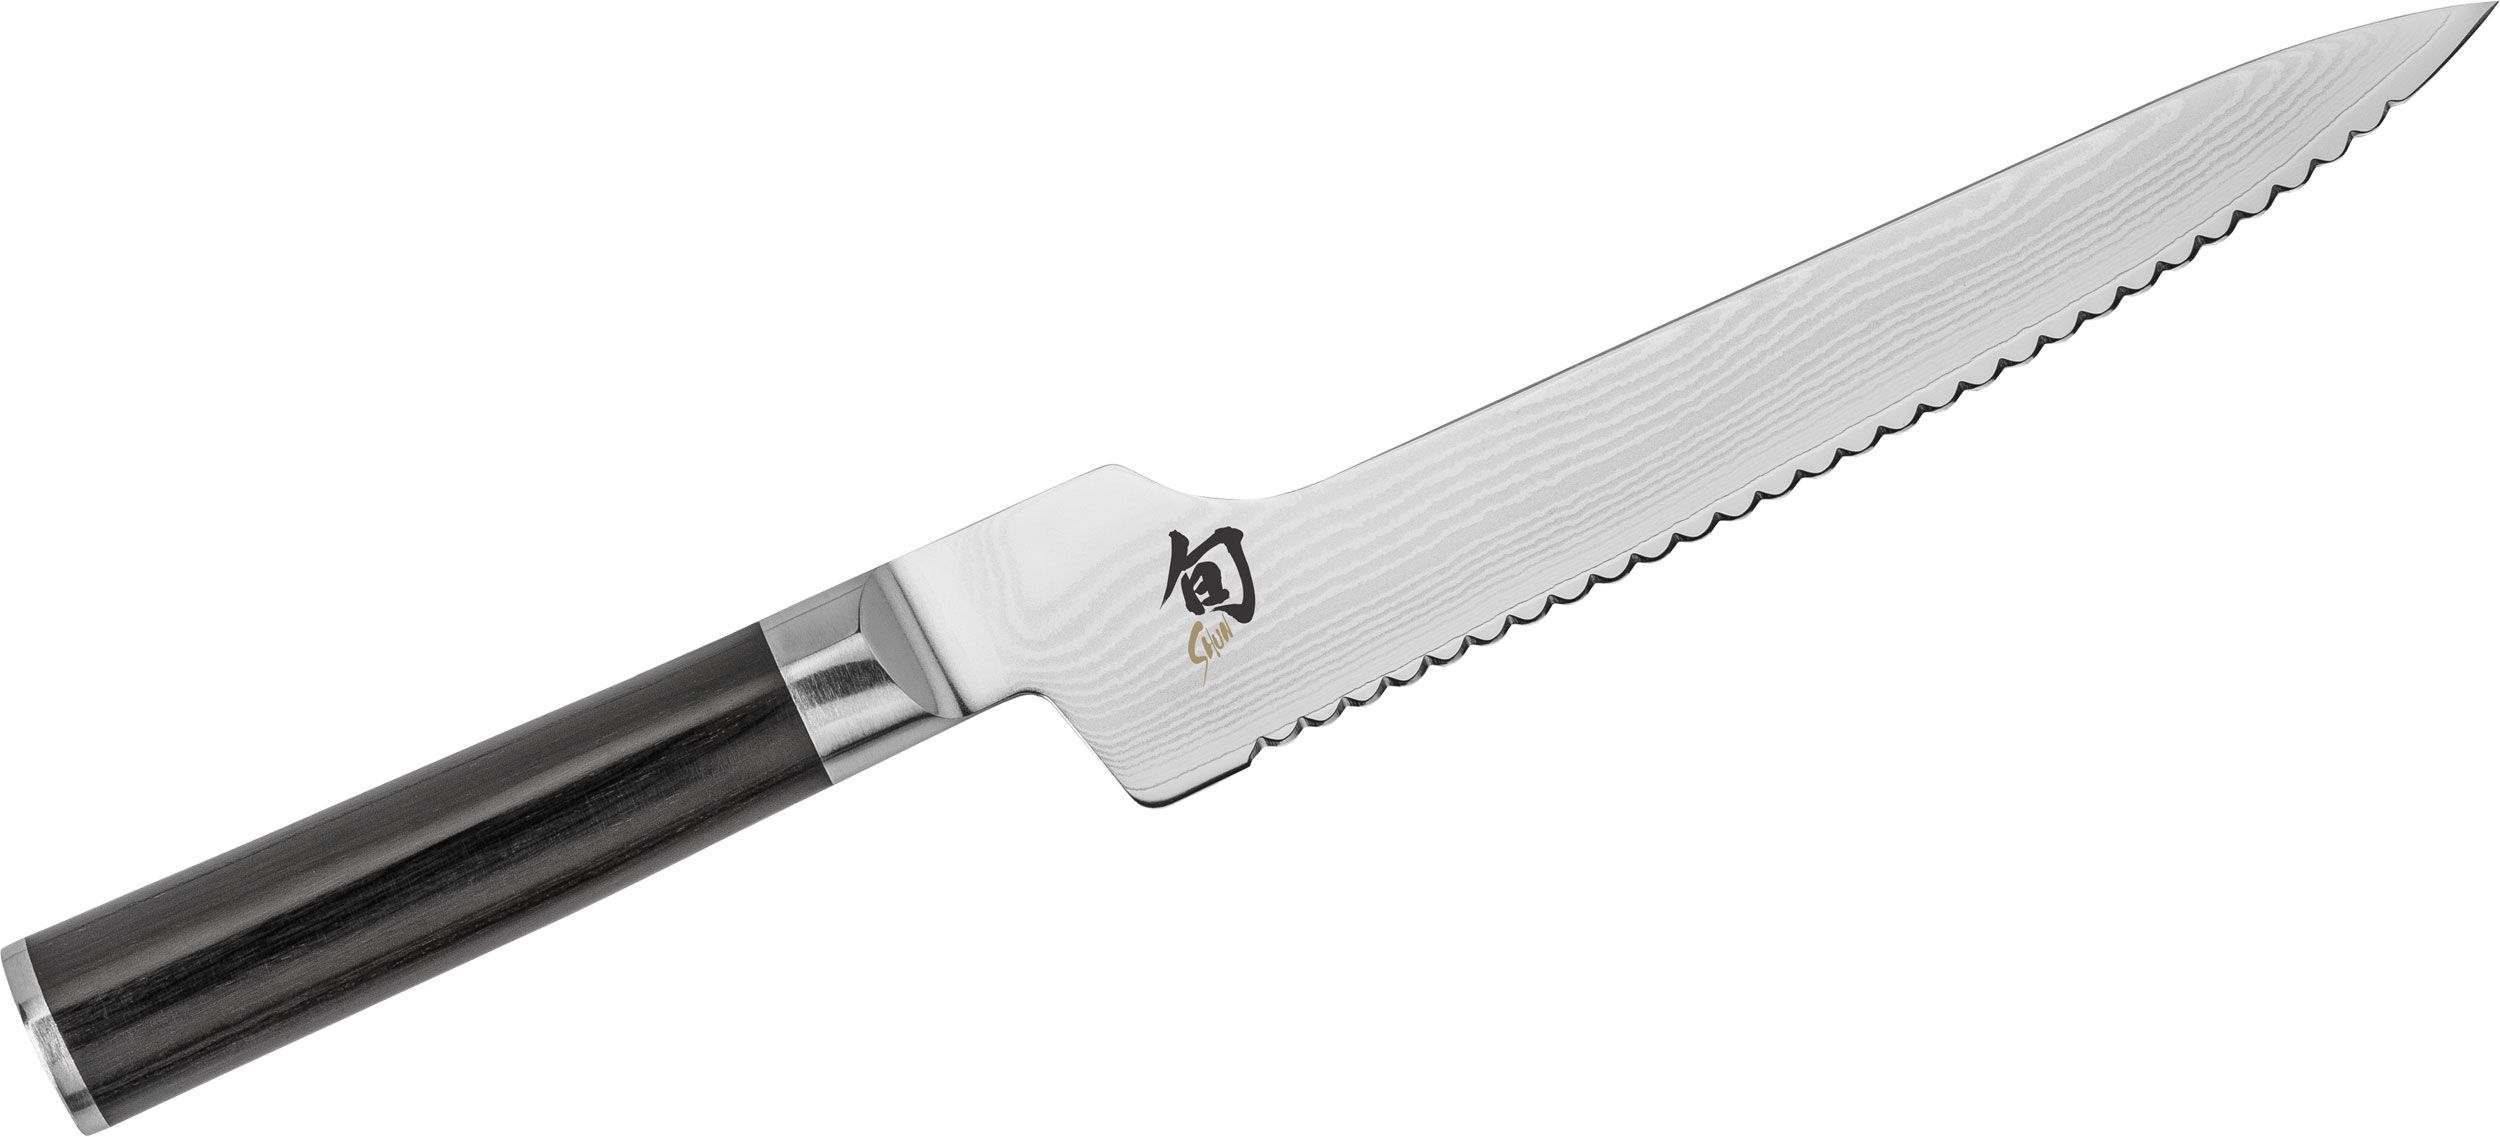 Mercer Culinary Millennia 8-Inch Wide Hollow Ground Chef's Knife, Black